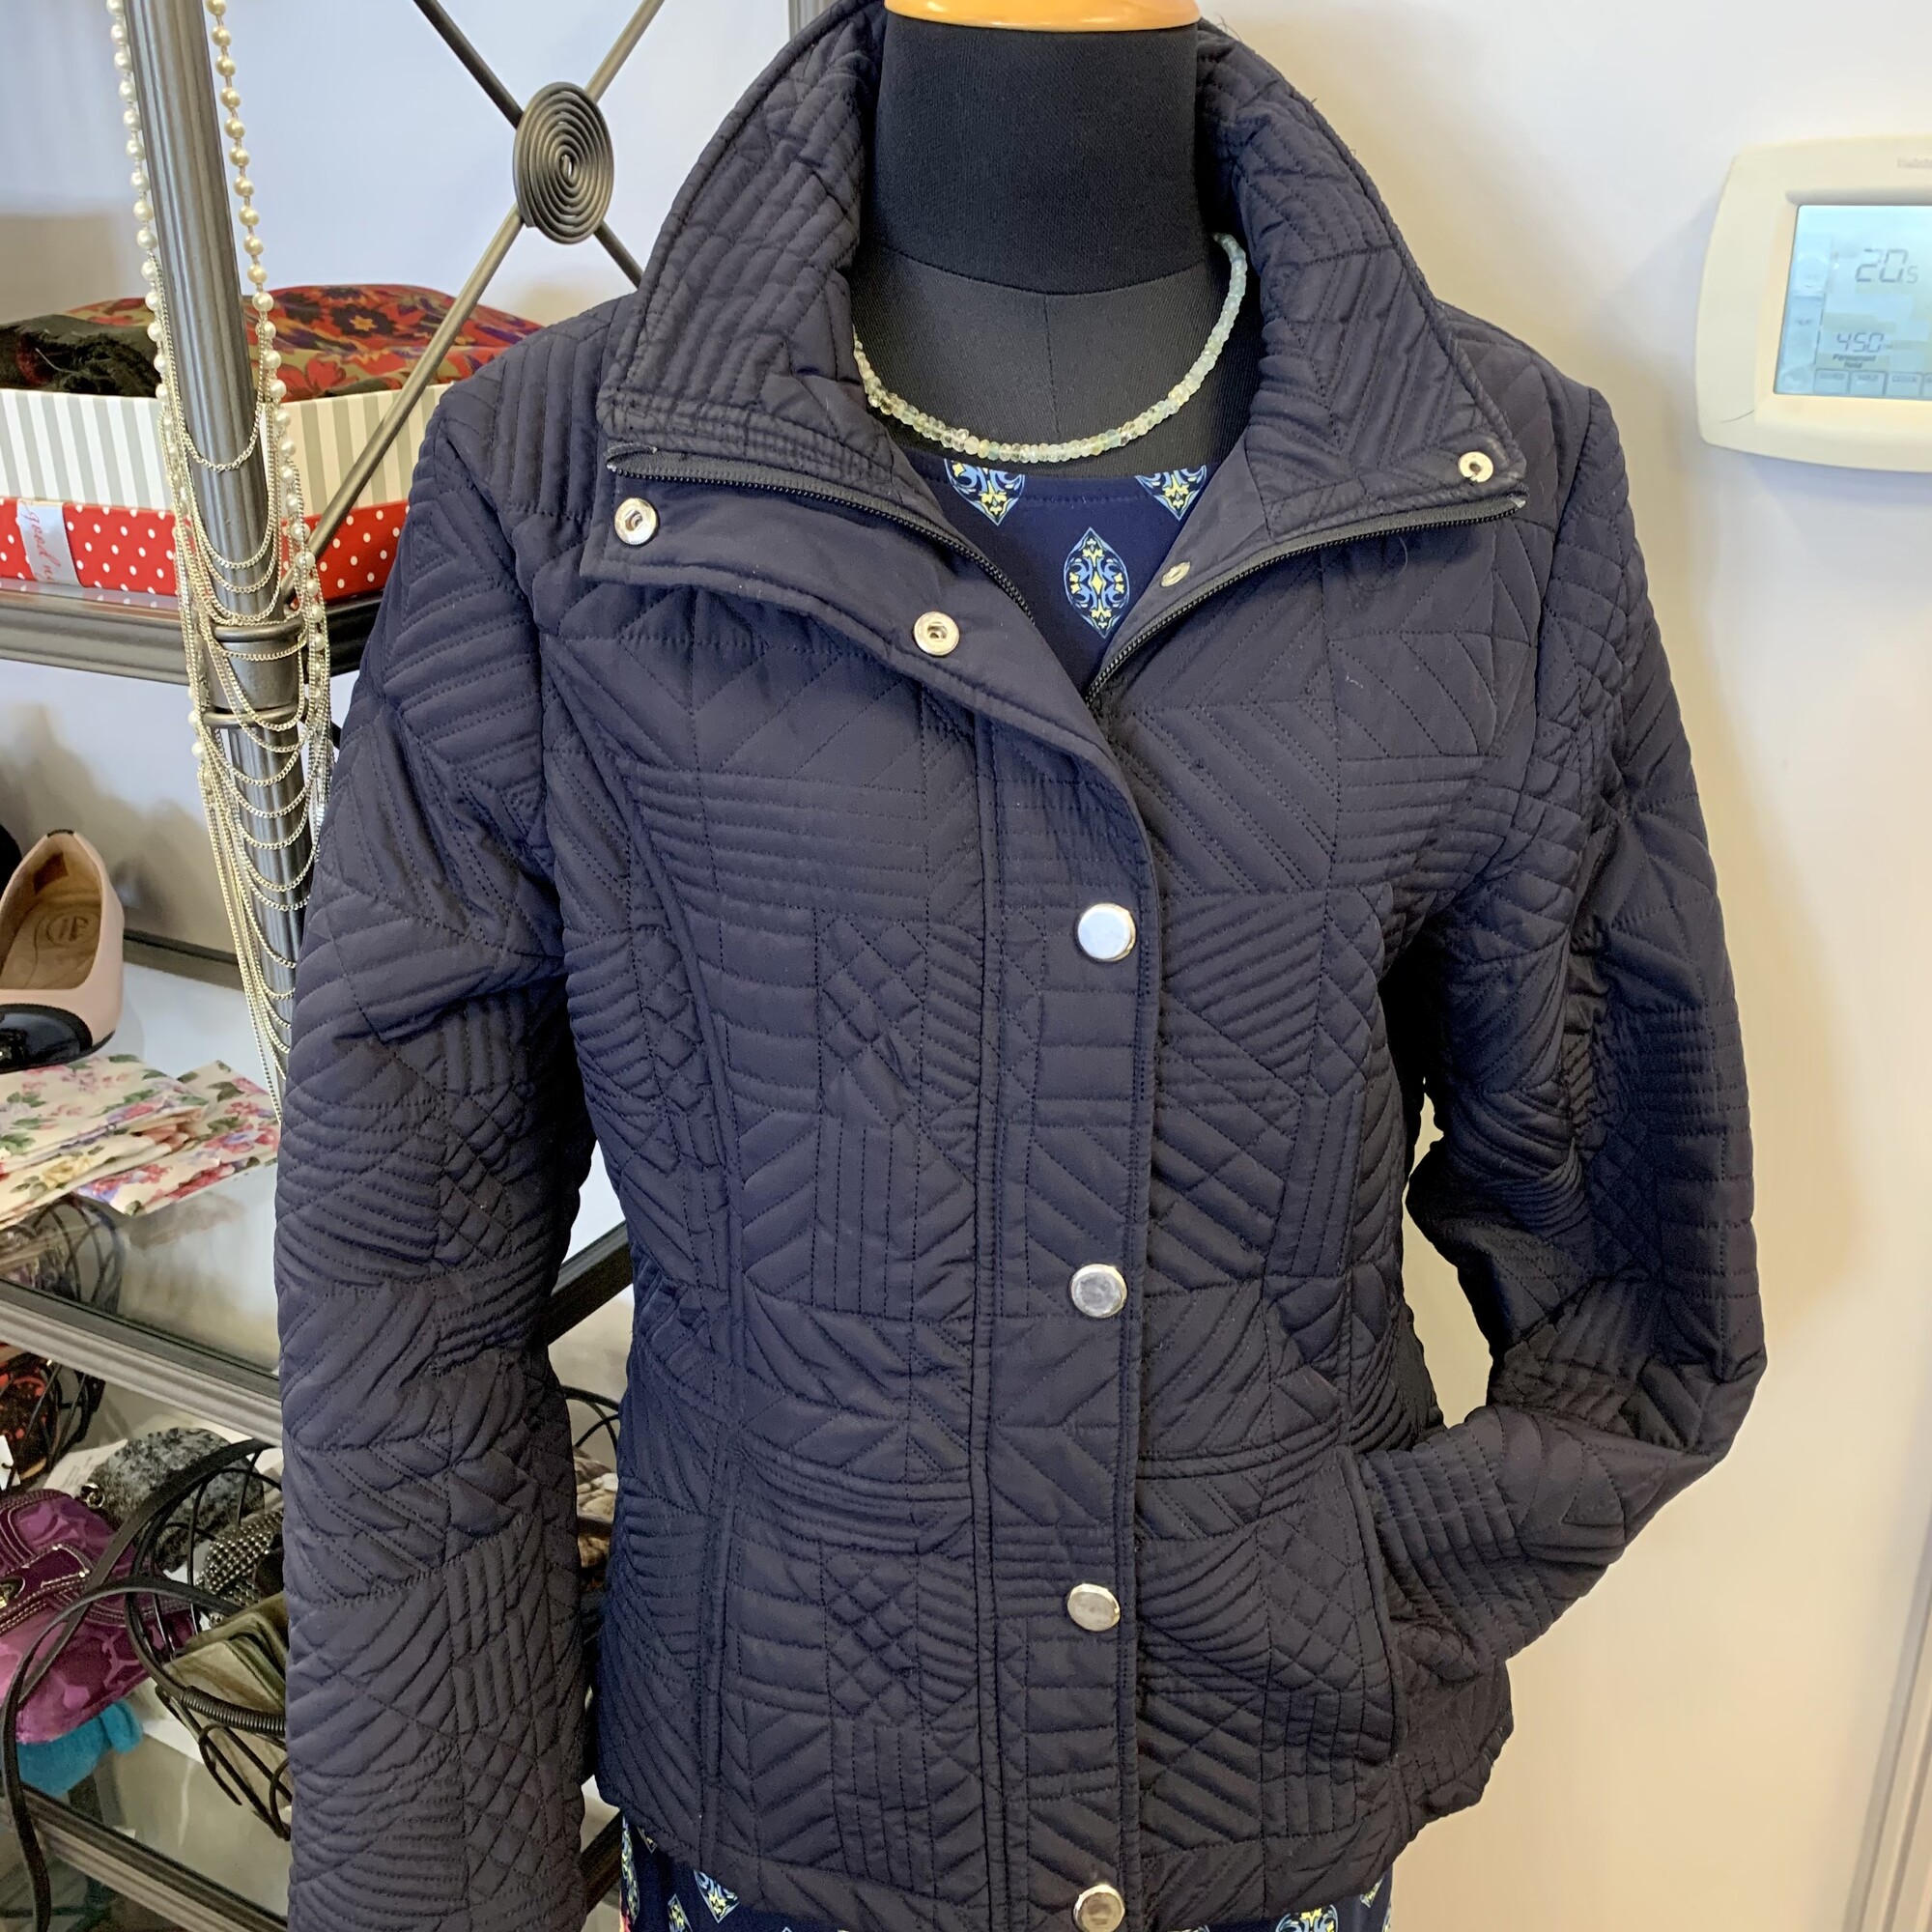 Weatherproof Jacket Quilted,
Colour: Navy,
Size: Medium,
Perfect spring jacket